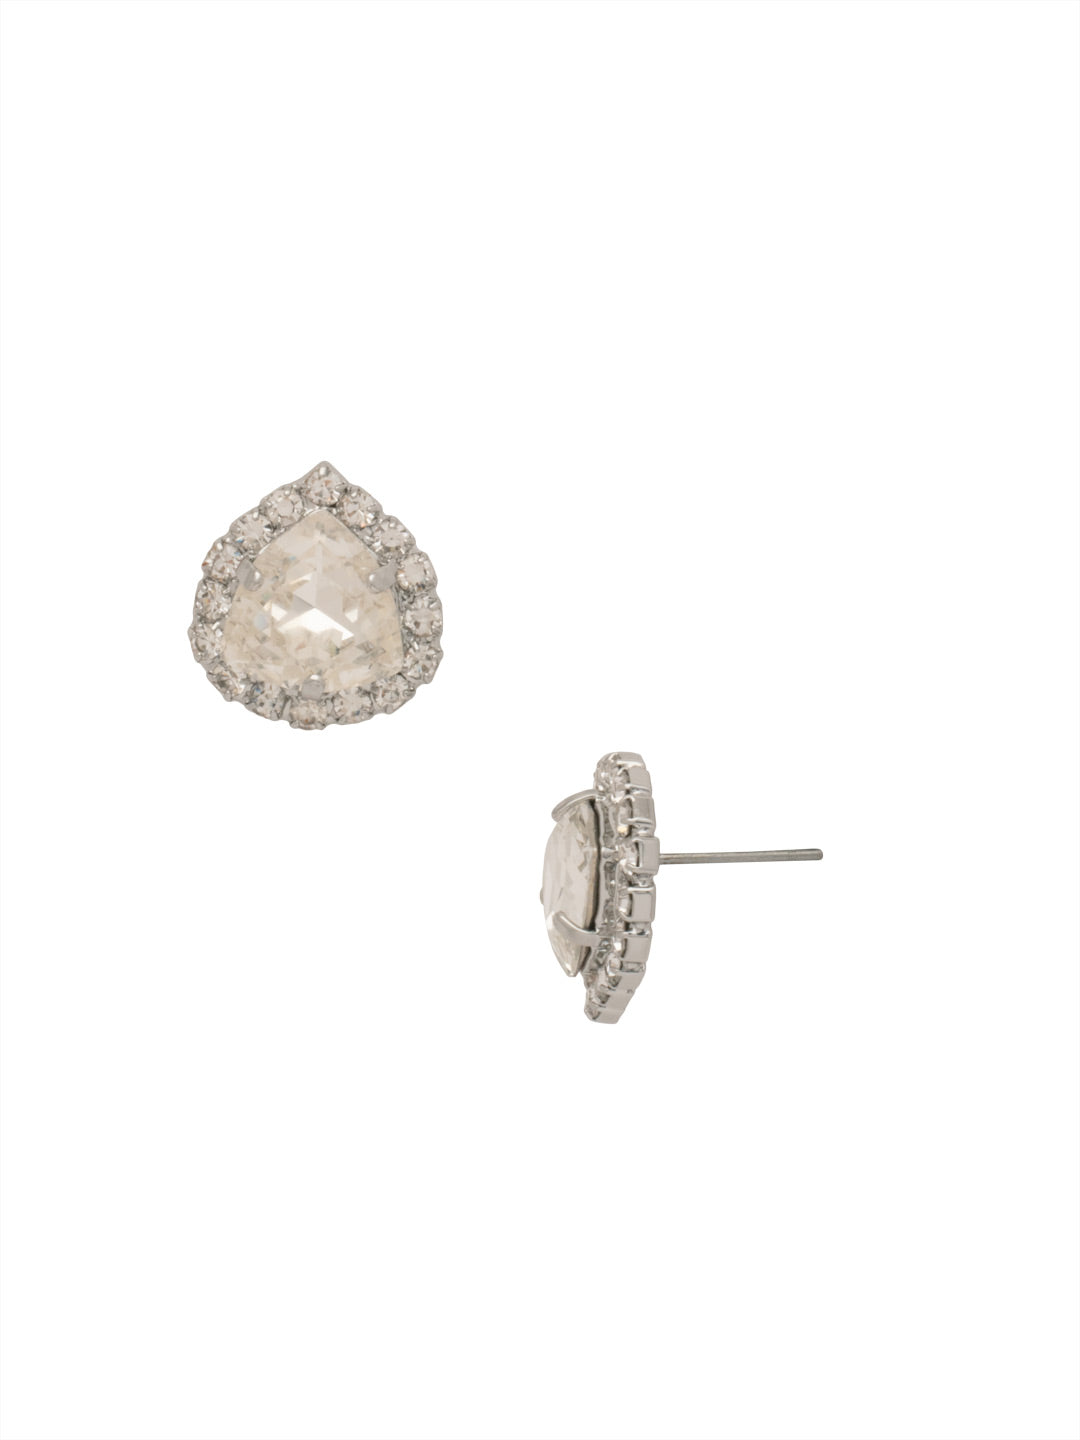 Linnea Stud Earrings - EFH14PDCRY - <p>The Linnea Stud Earrings are an elegant twist on a simple stud; a halo of crystals surrounds a single trillion cut crystal. From Sorrelli's Crystal collection in our Palladium finish.</p>